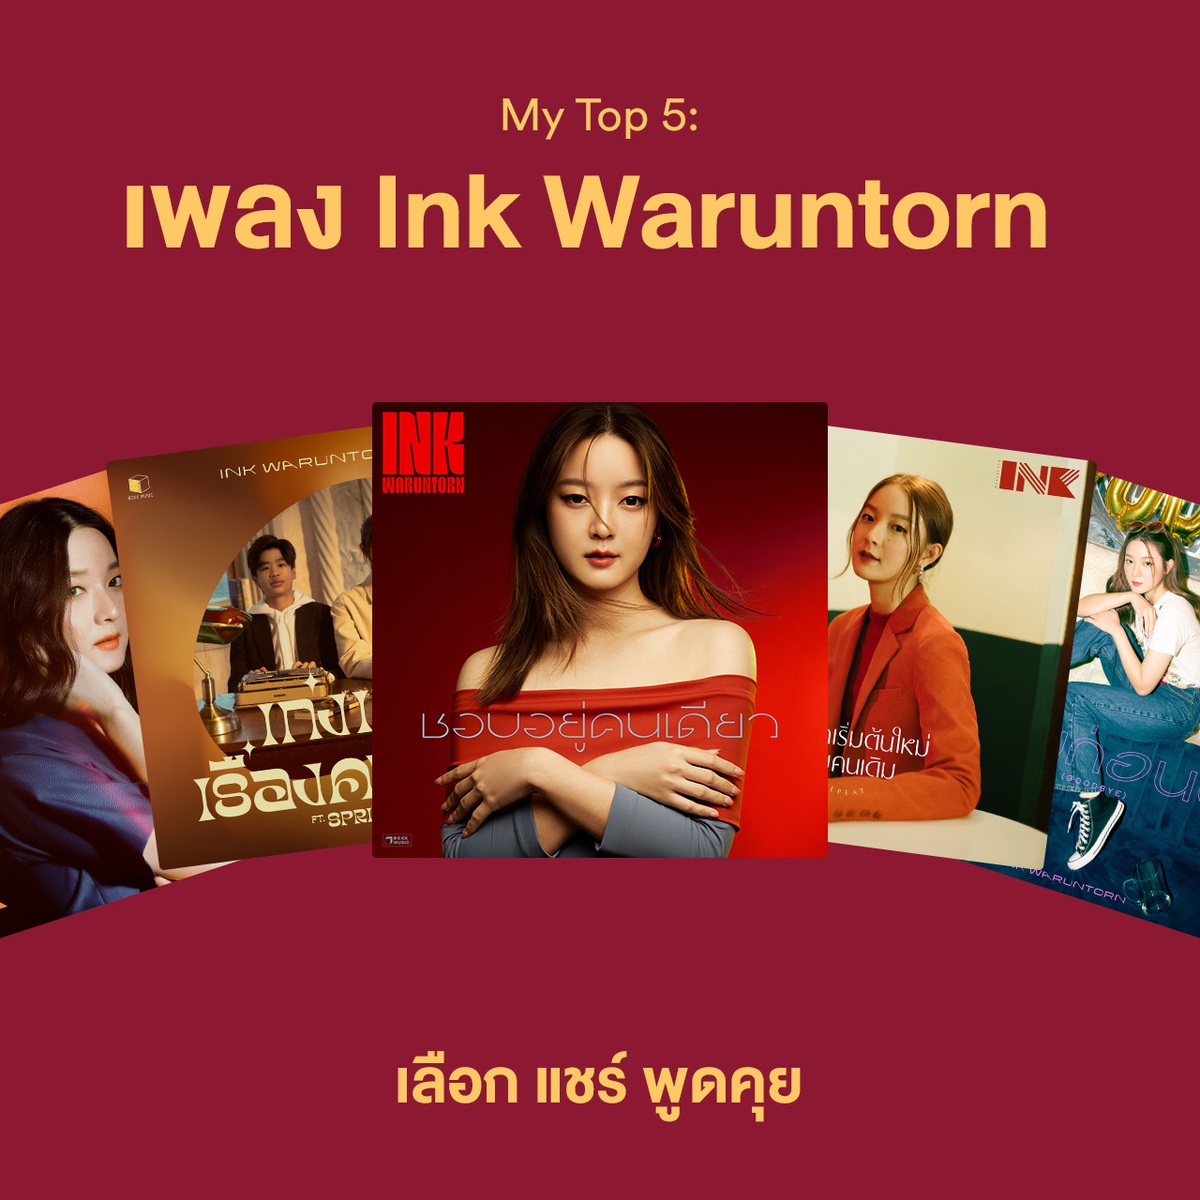 Spotify launches My Top 5: Ink Waruntorn - an interactive in-app experience featuring chart-topping Thai artist Ink